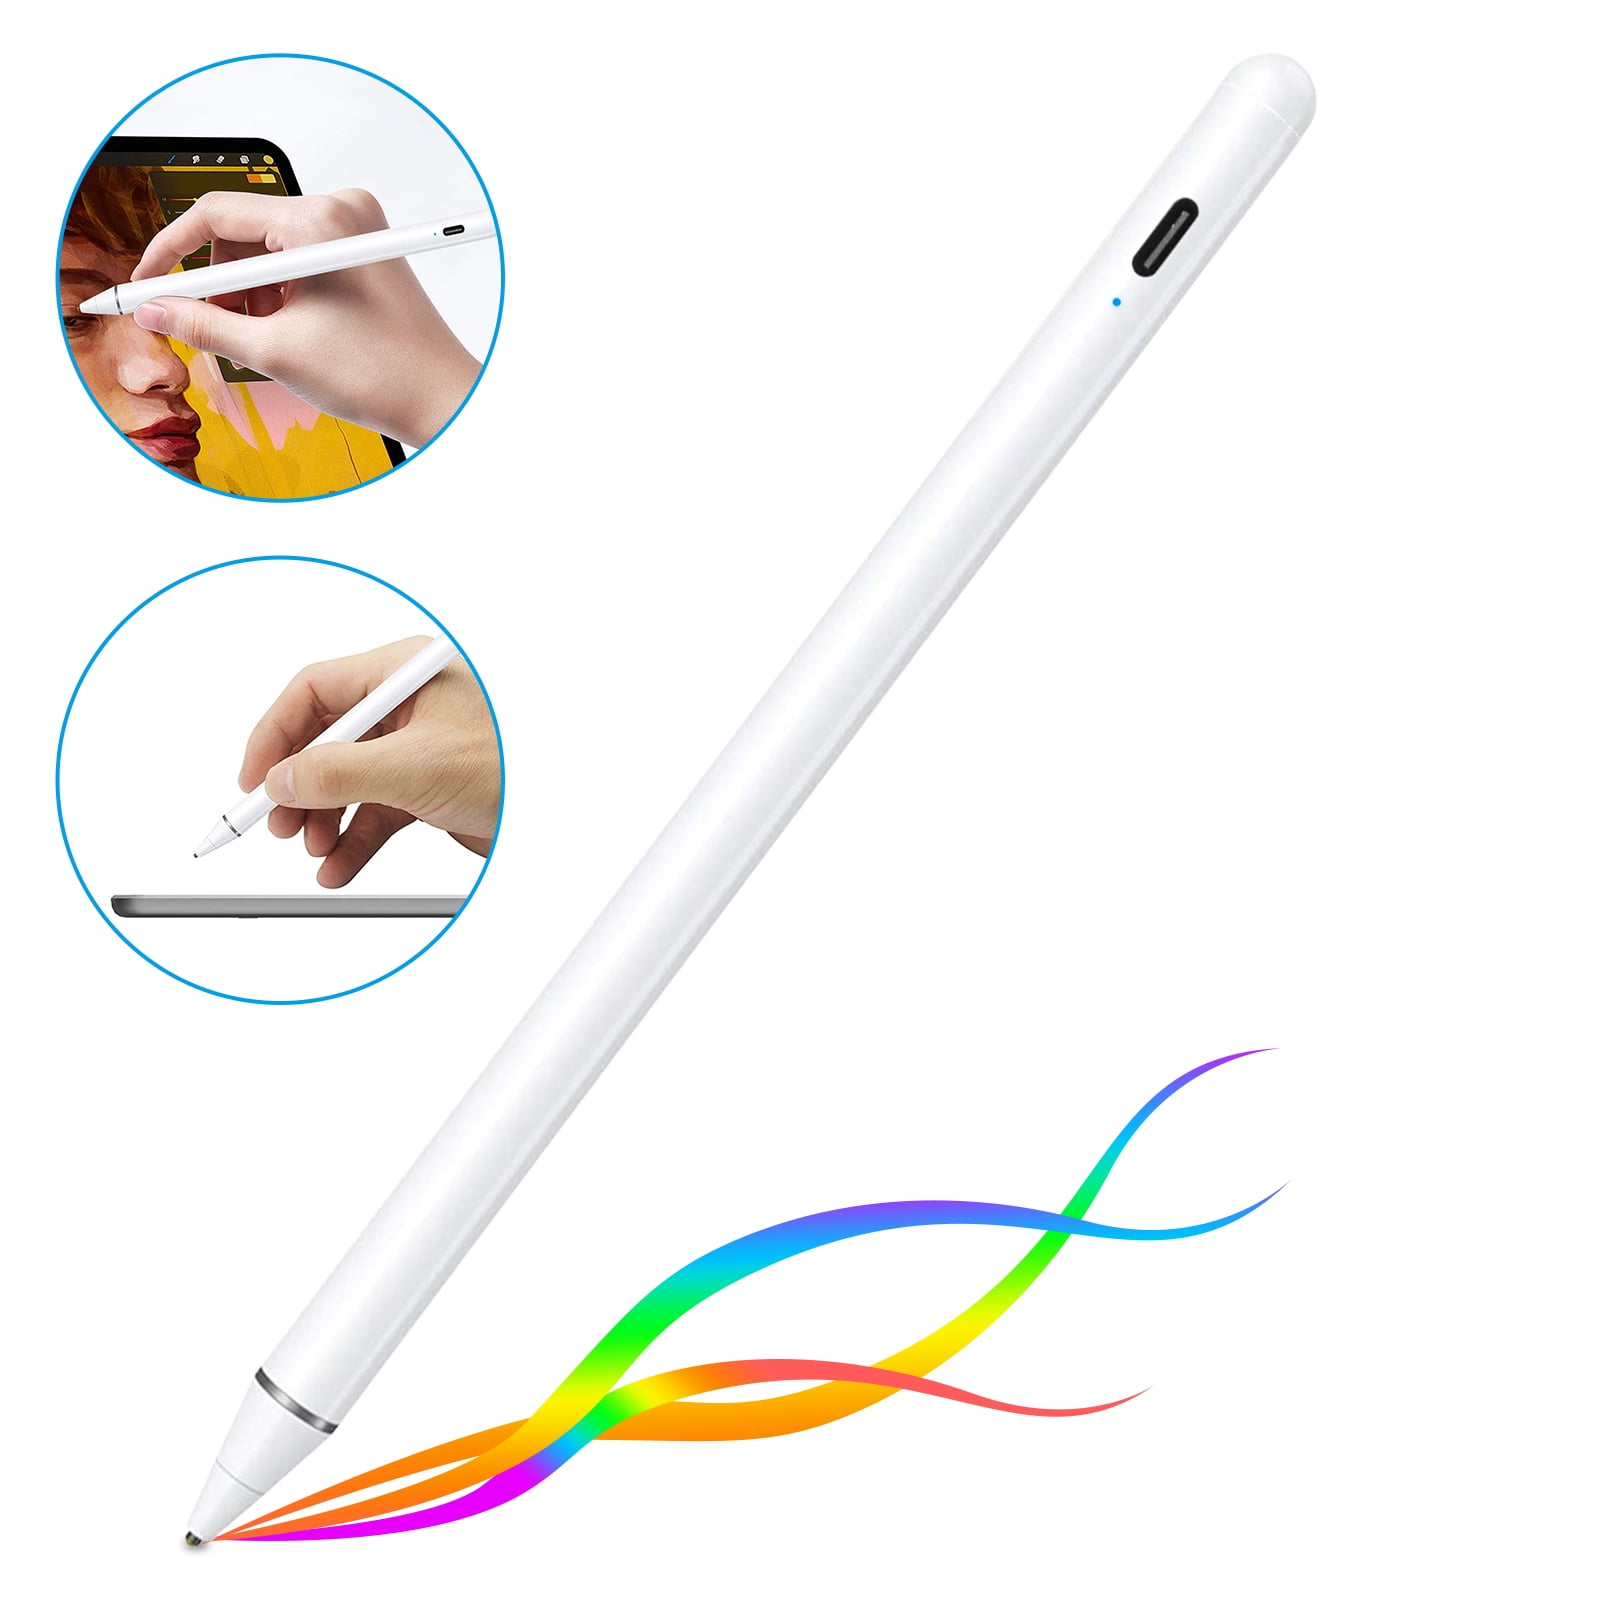 Active Stylus Pen, EEEkit Touch Screen Stylus Pencil Fit for iPad/Pro/Air/Mini, High Sensitivity Stylus Pen for Writing/Drawing - White, Size: Middle